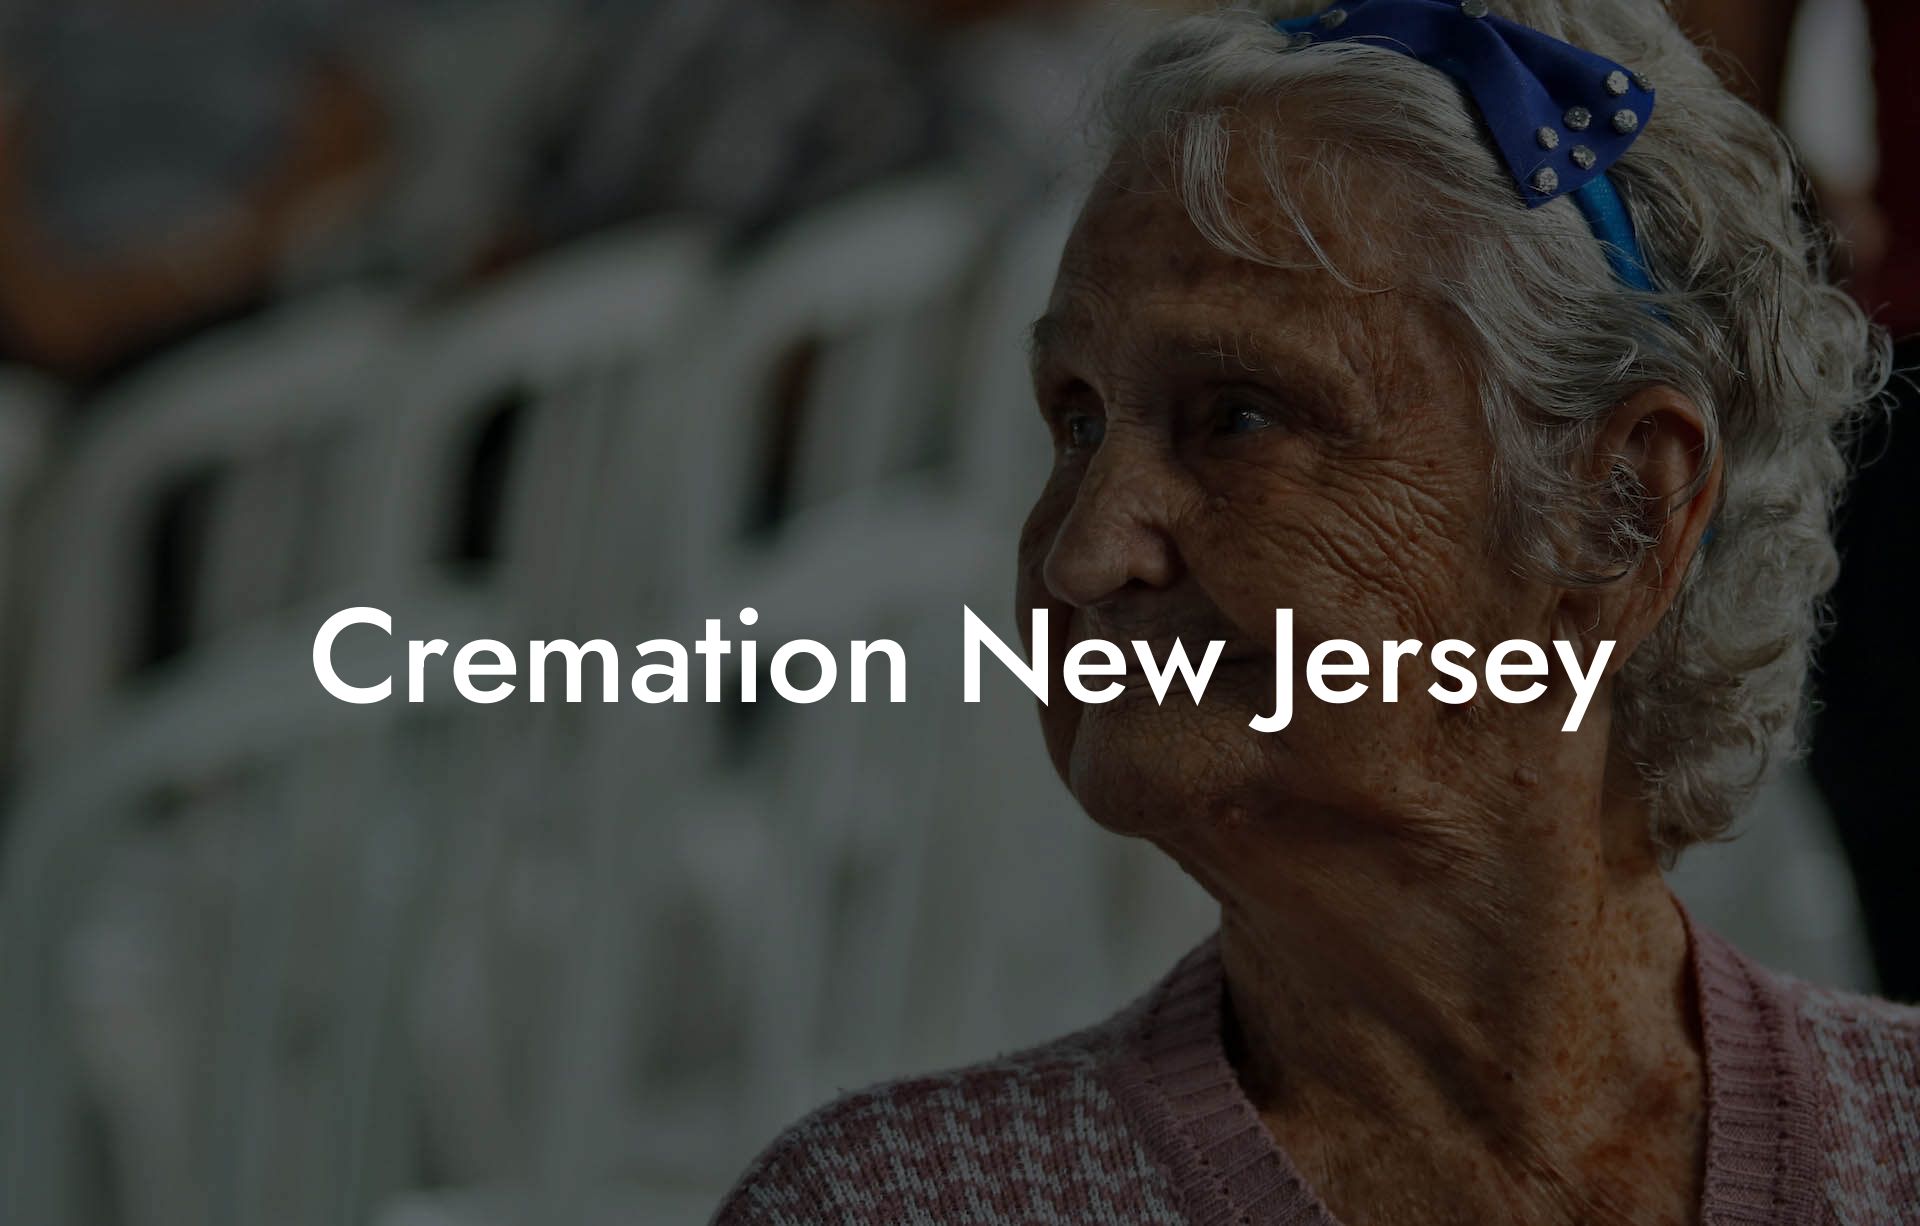 Cremation New Jersey